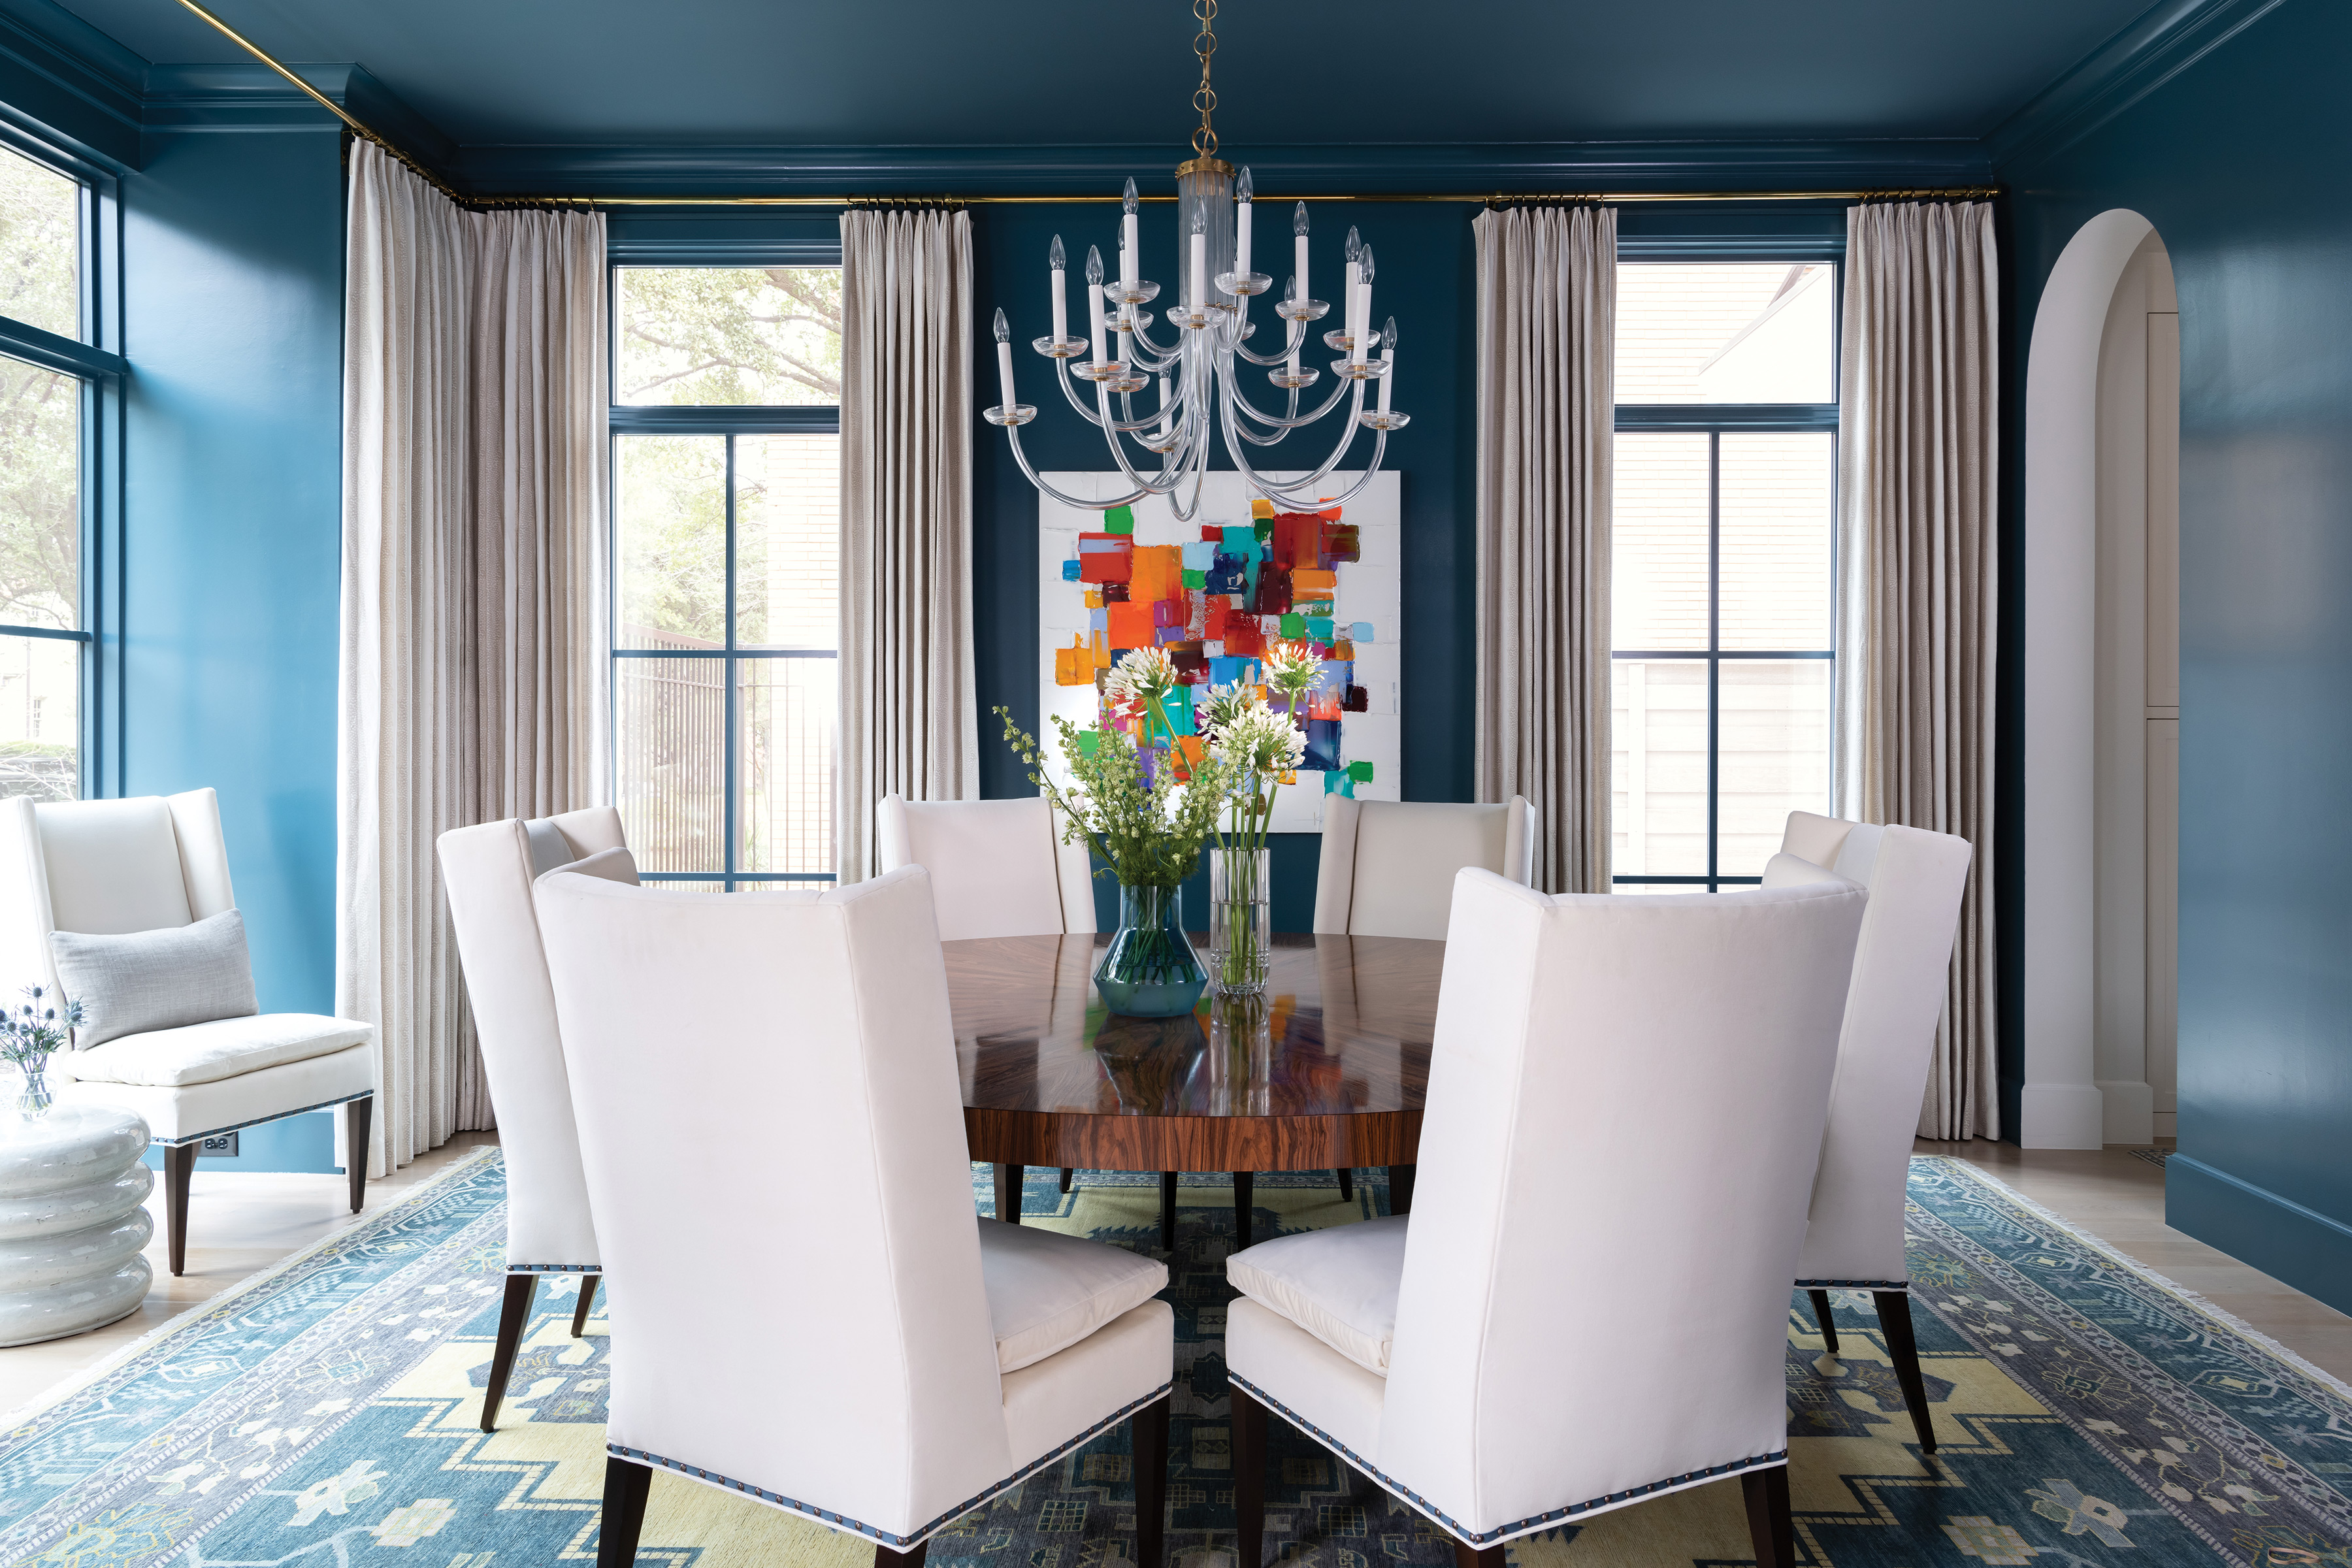 A dining room with a dramatic Twist